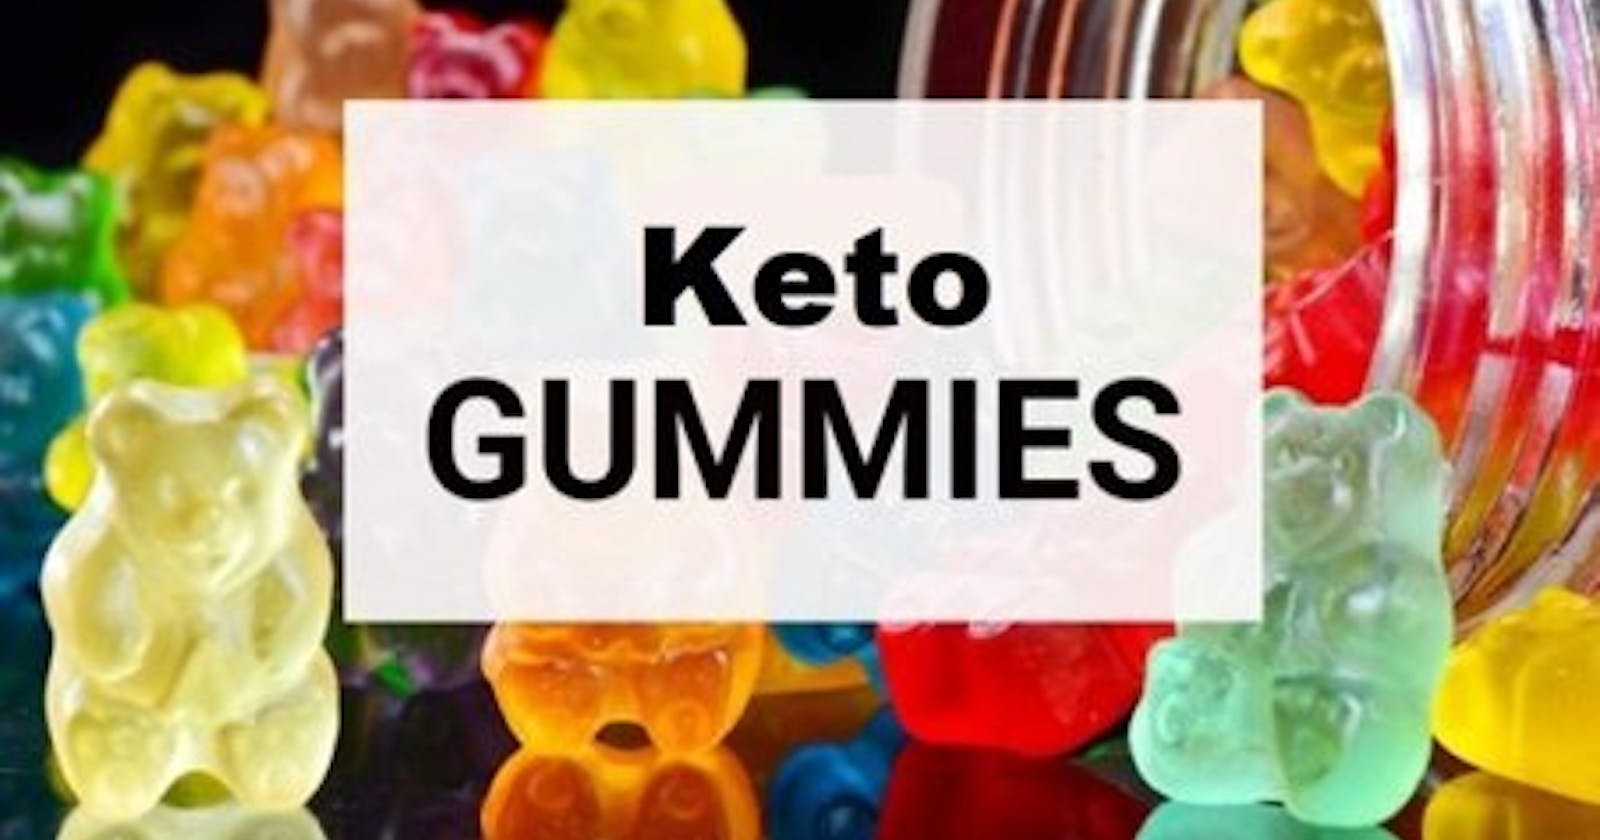 Anatomy One Keto ACV Gummies Reviews 2023: Proven Results Before And After Do the Keto Pills Research Before Buying! Safe Supplement or Fake?